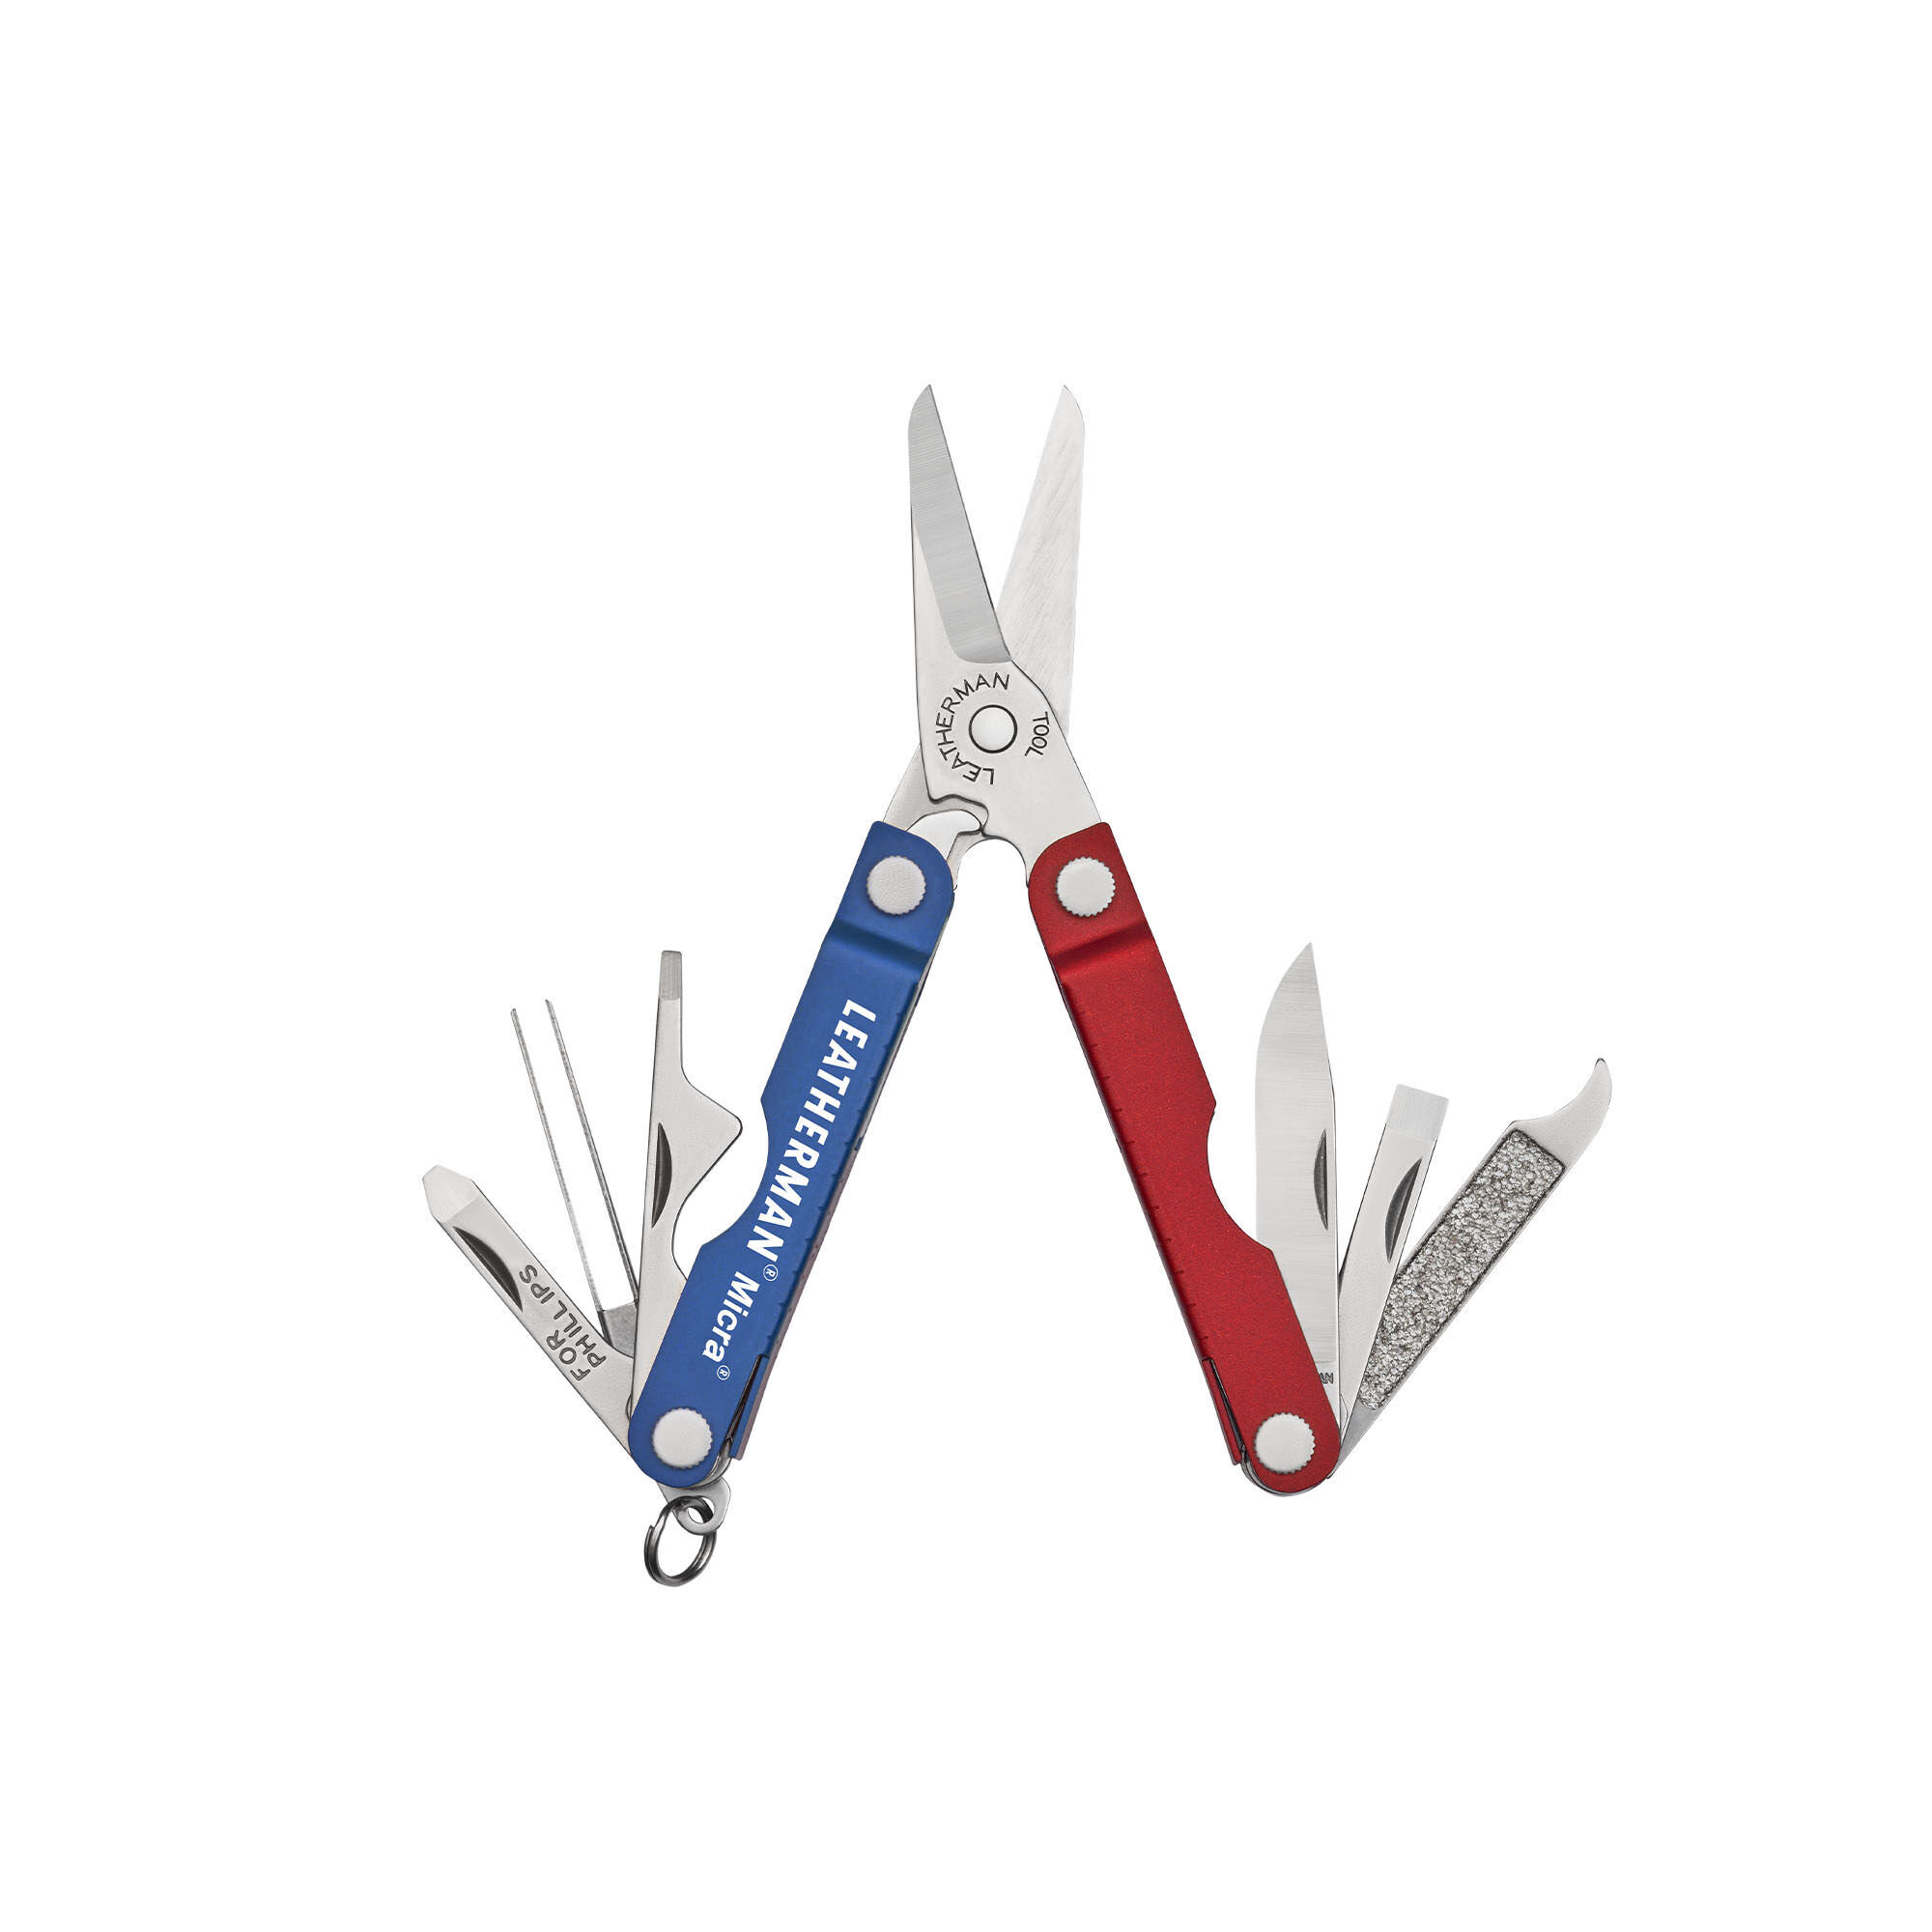 Leatherman Micra Blue, keychain multi-tool  Advantageously shopping at